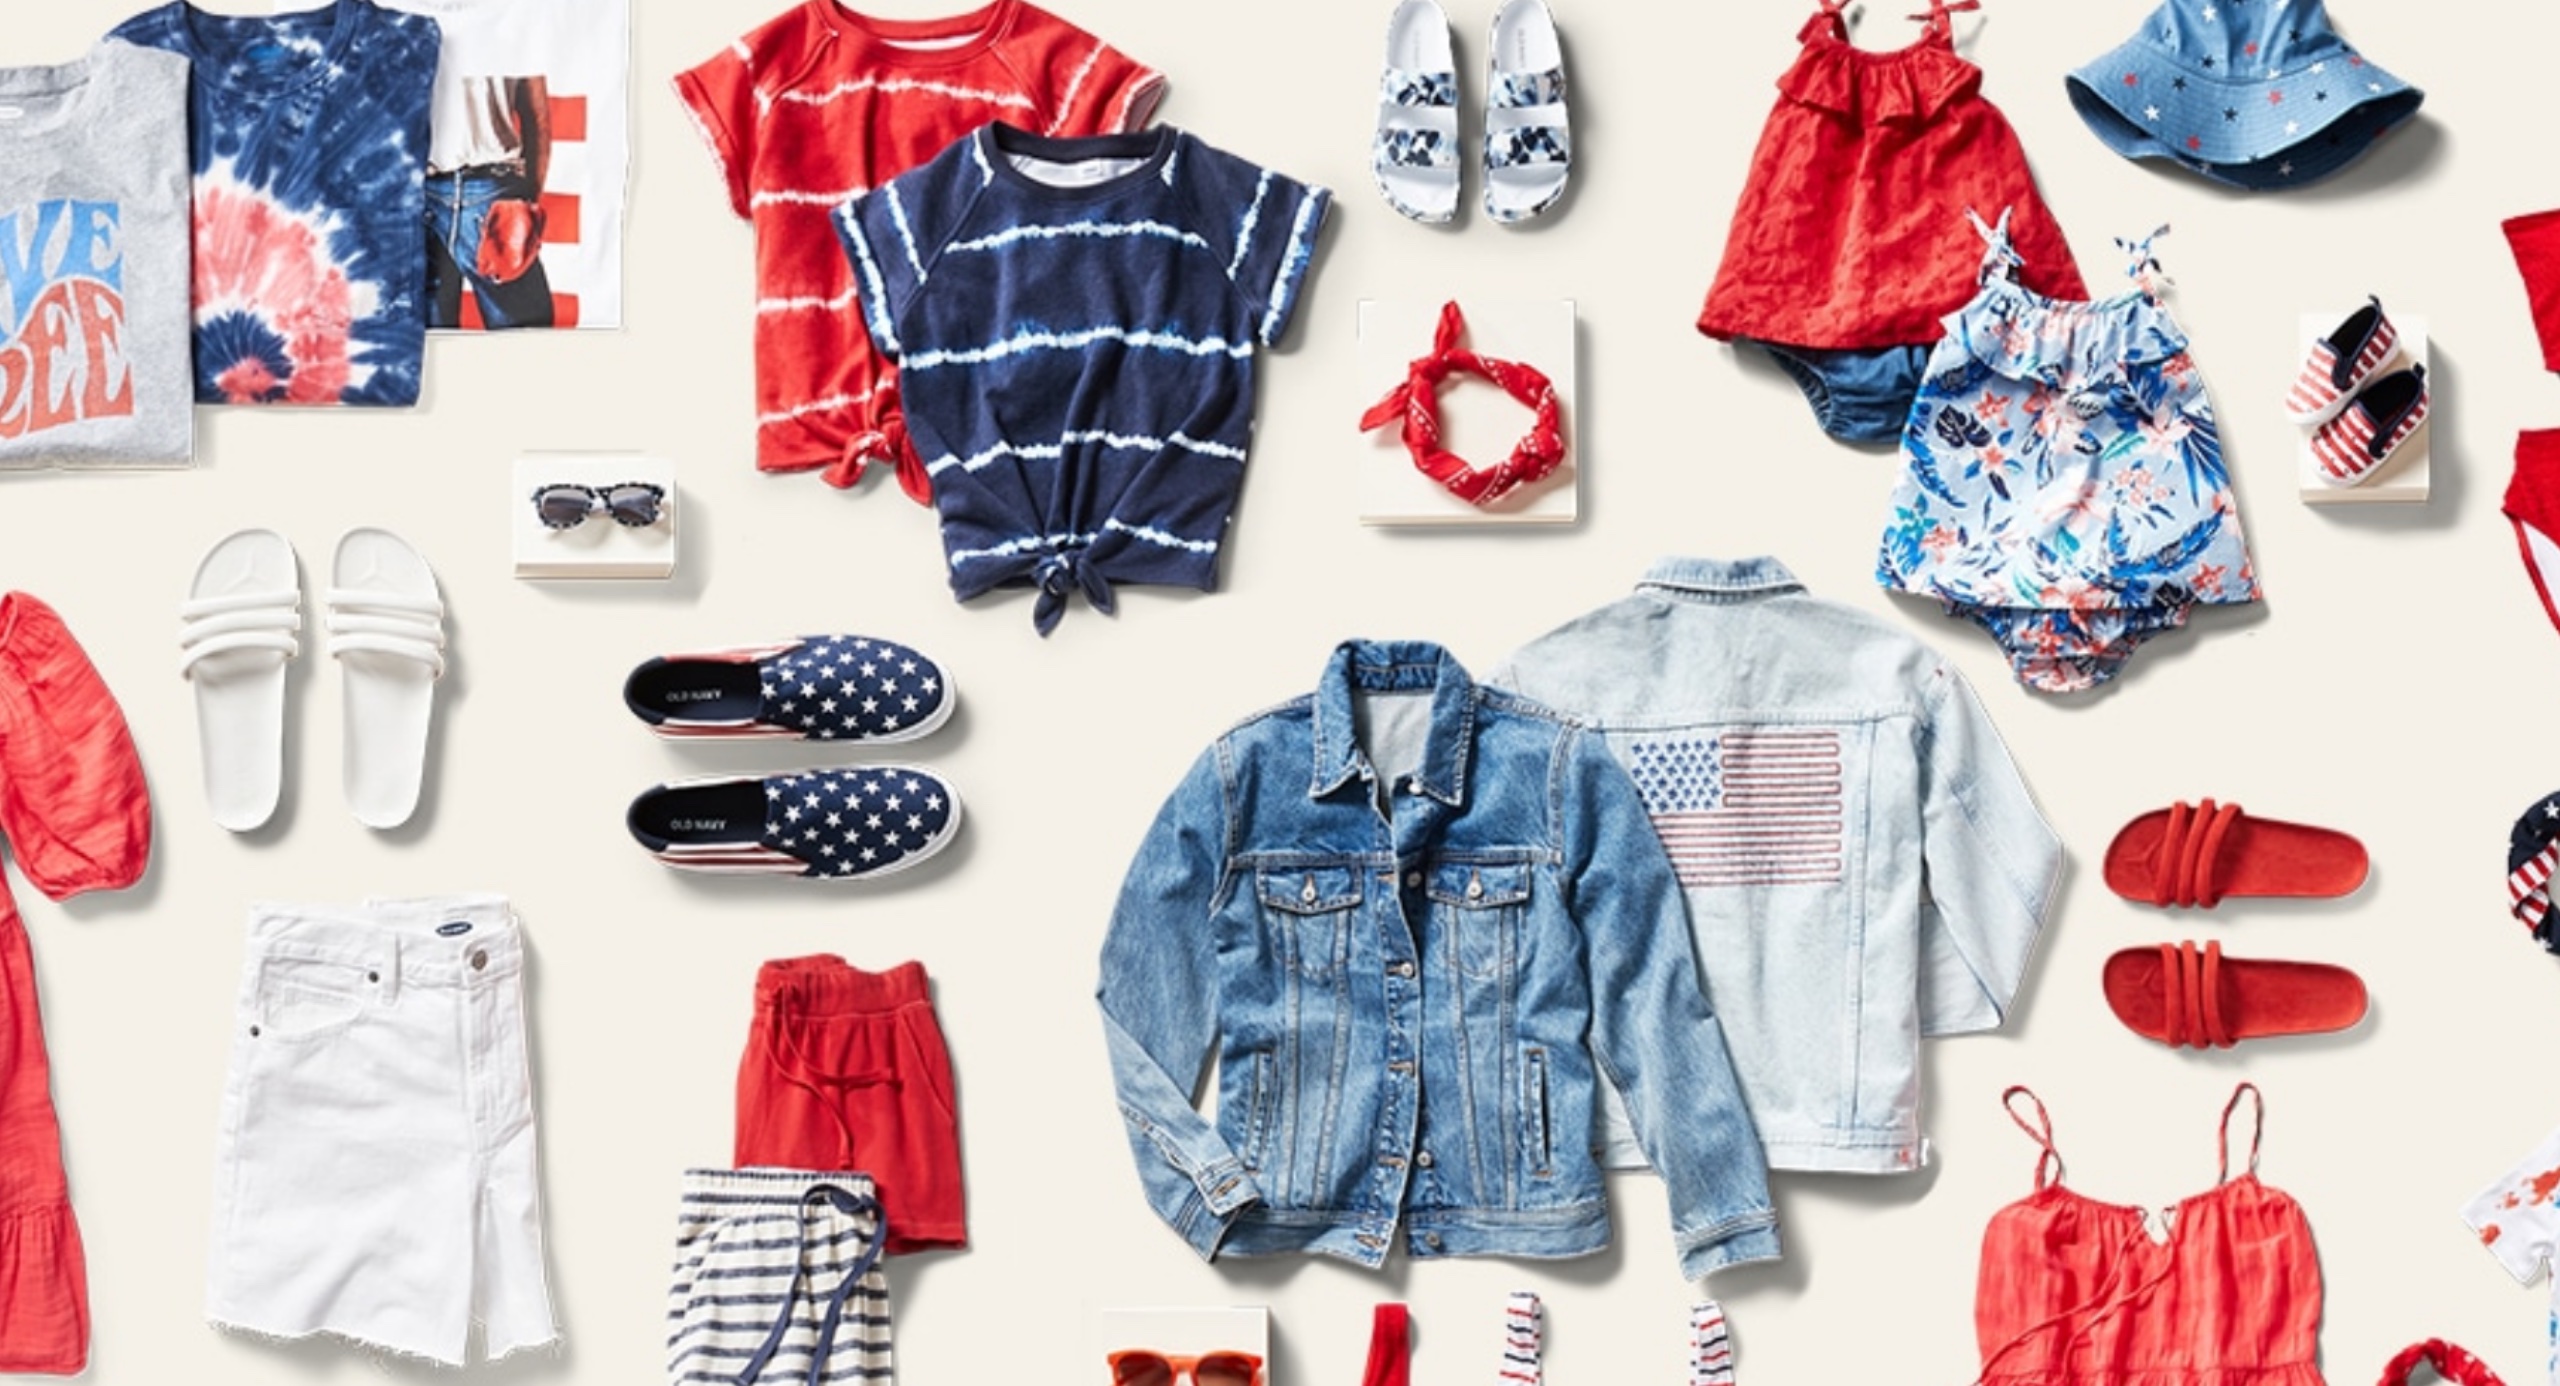 Old Navy's July 4th Sale offers deals from just $8 with up to 50% off  sitewide